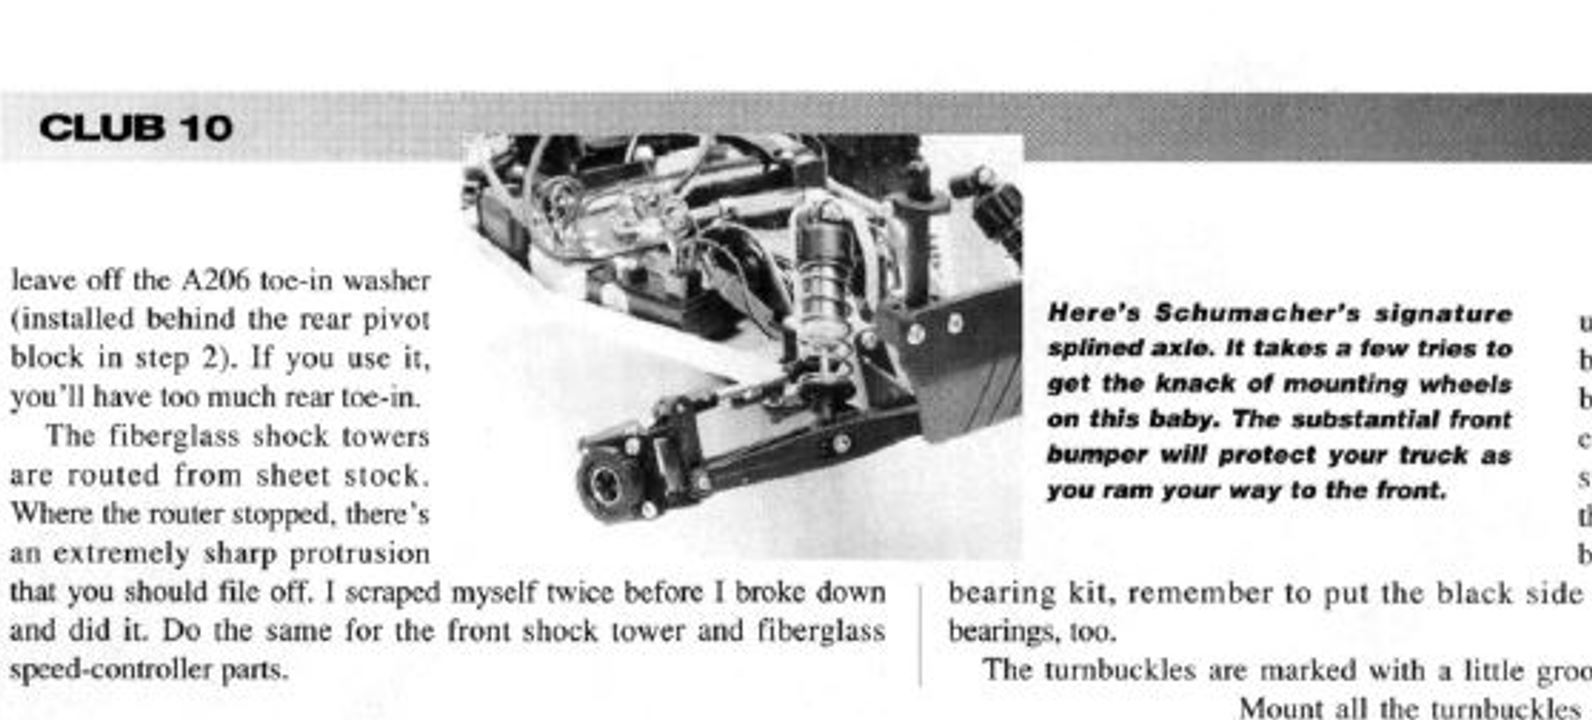 #TBT Schumacher Club 10 stadium truck Reviewed in the February 1993 Issue